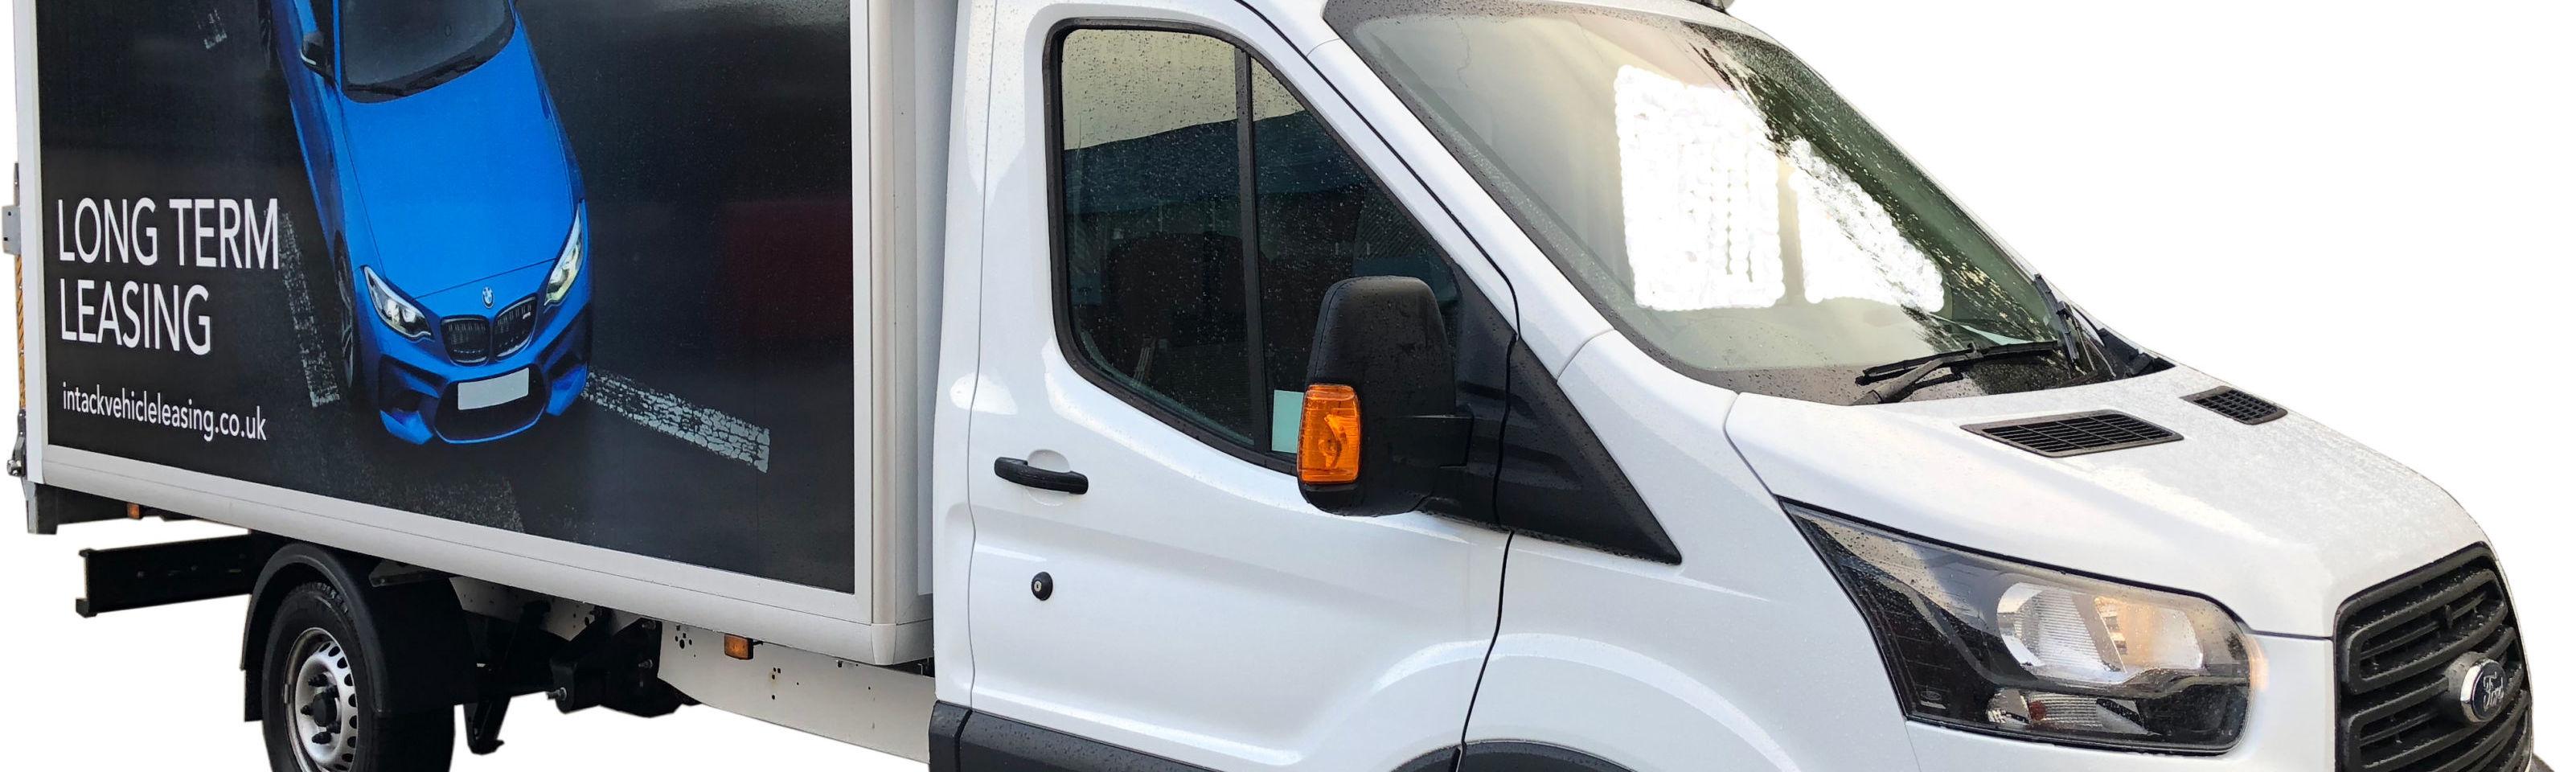 What size van is best to hire when moving house?